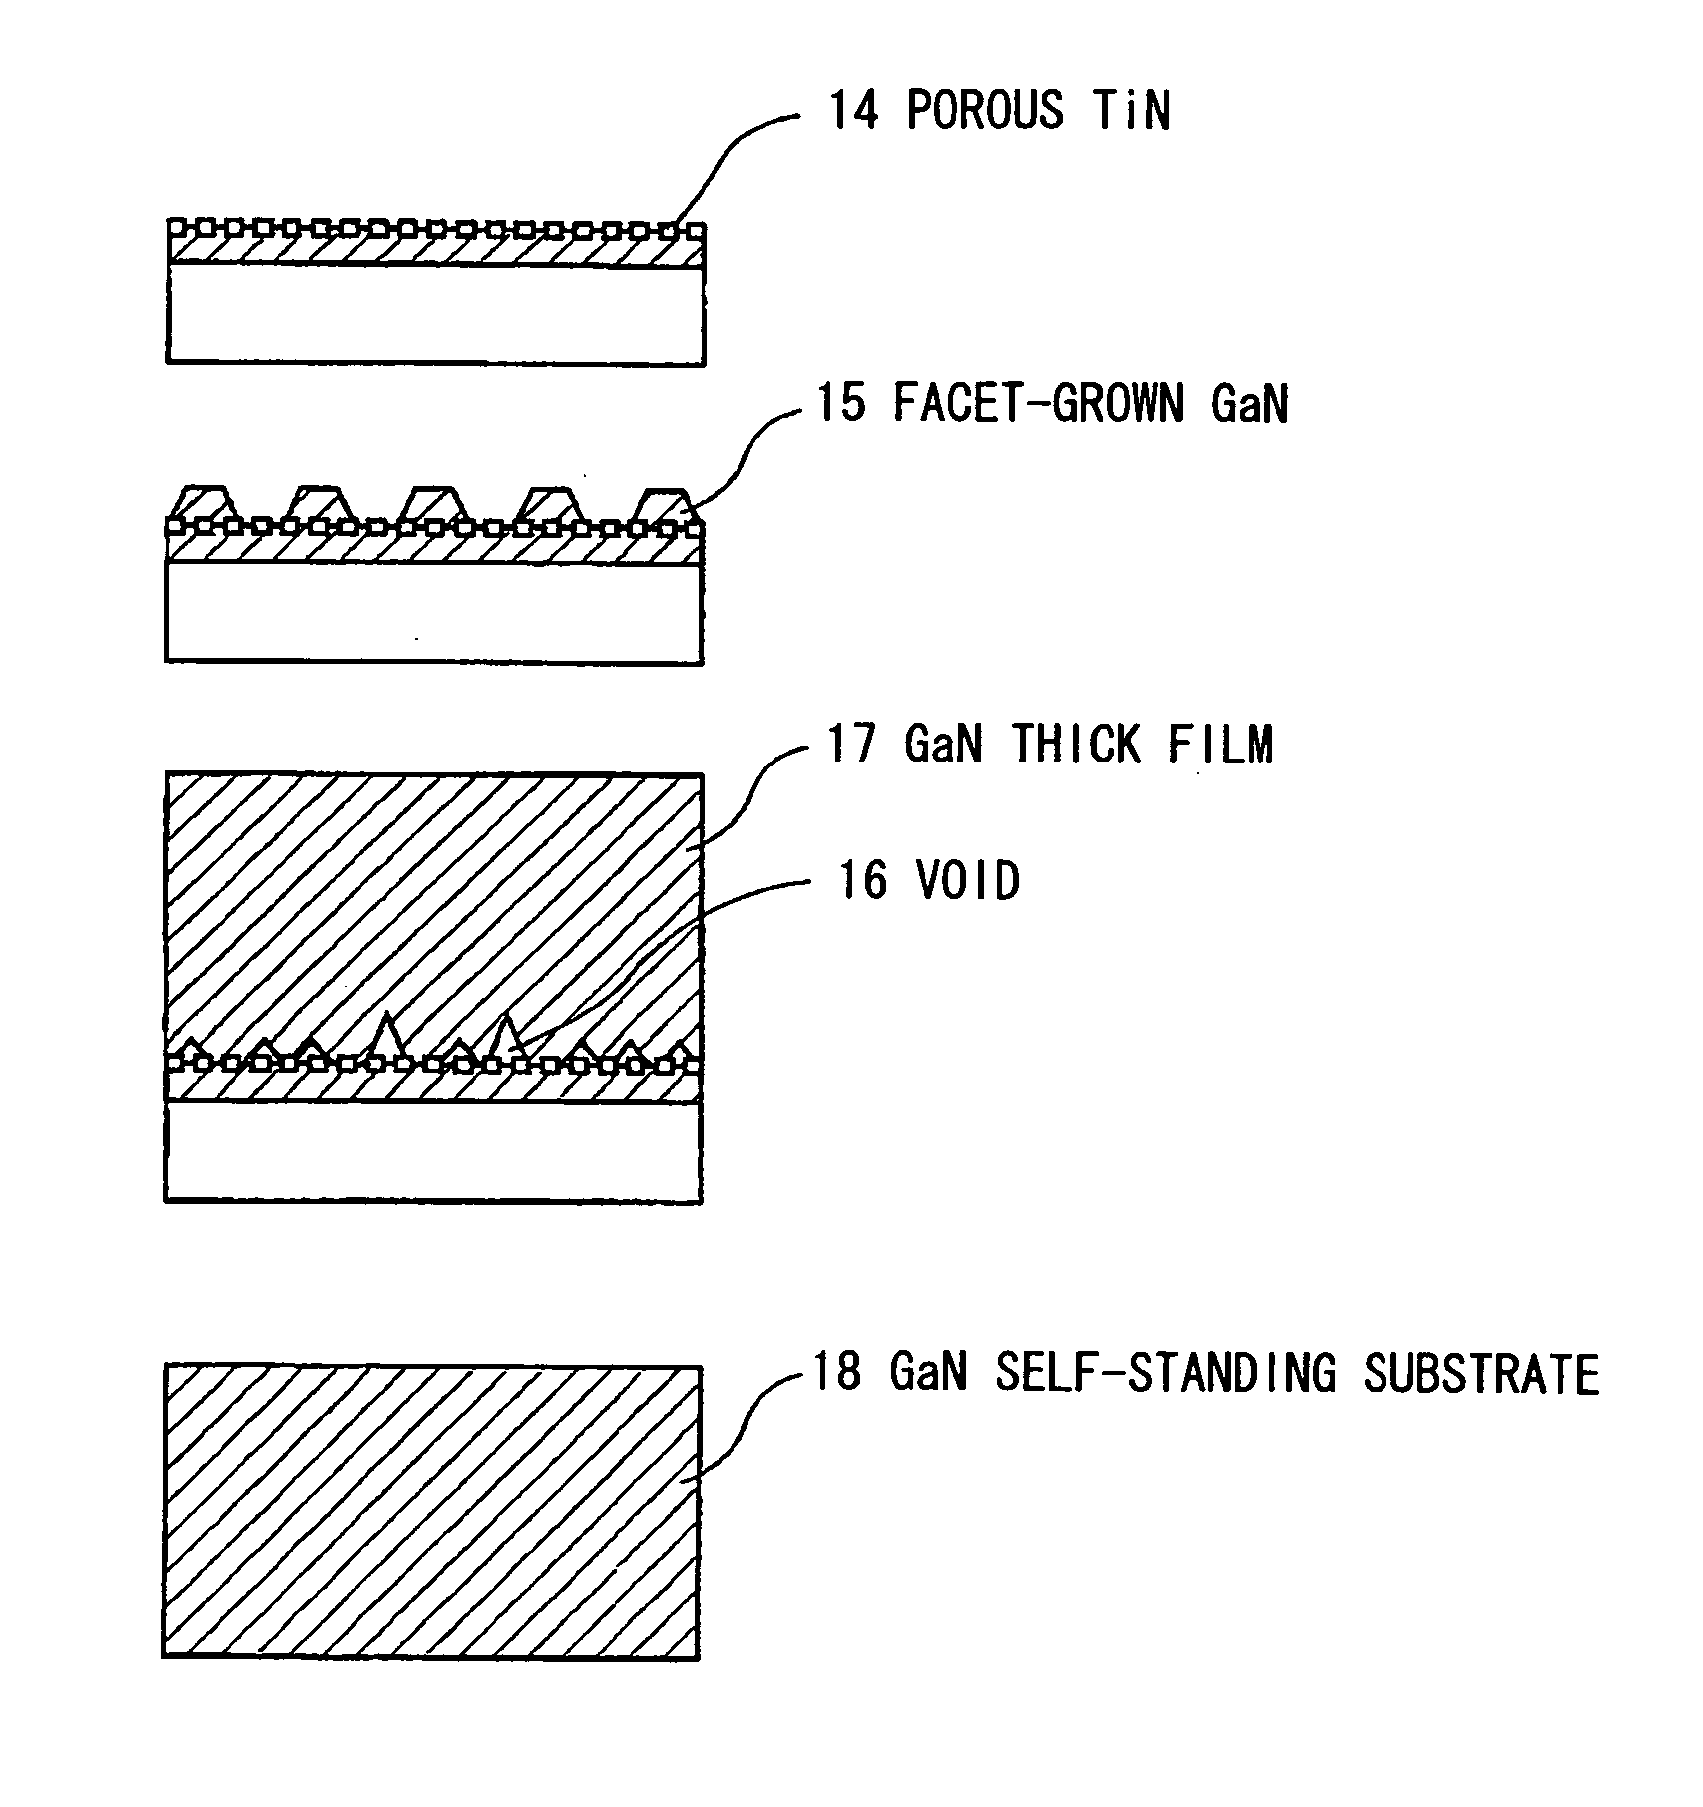 Nitride-based semiconductor substrate and method of making the same